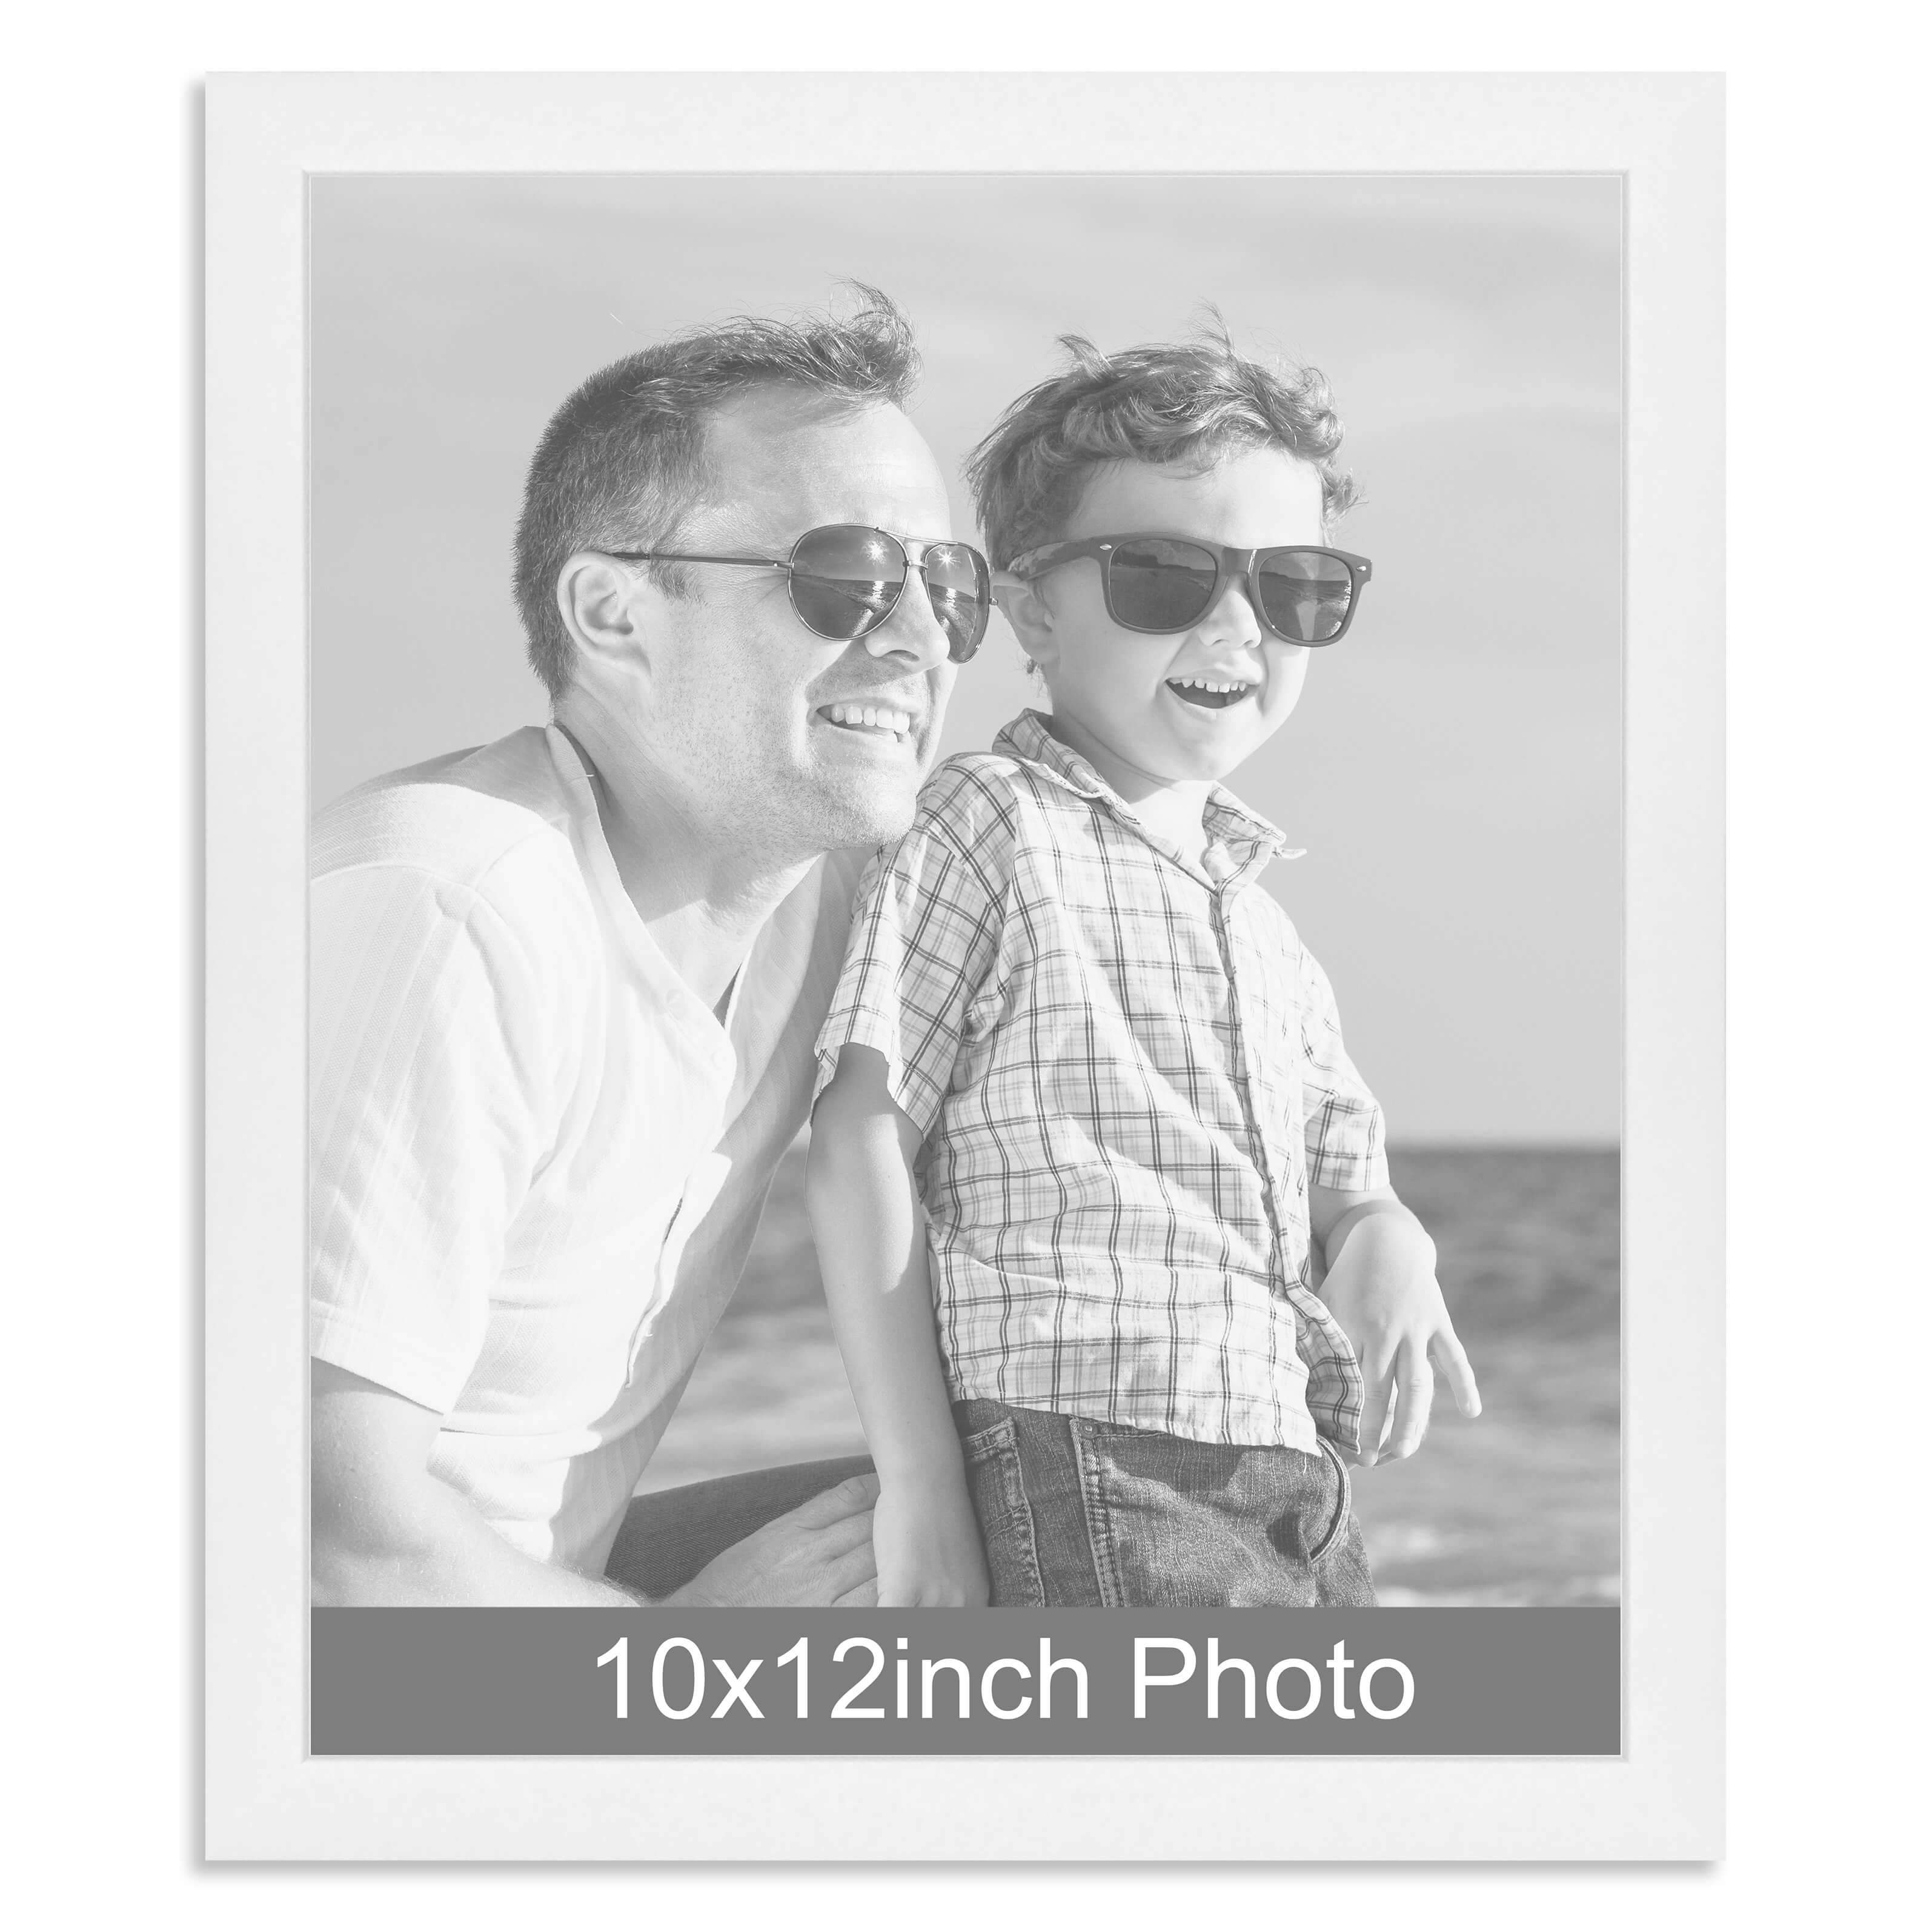 10 x 12inch White Wooden Photo Frame for a 10×12/12x10in photo